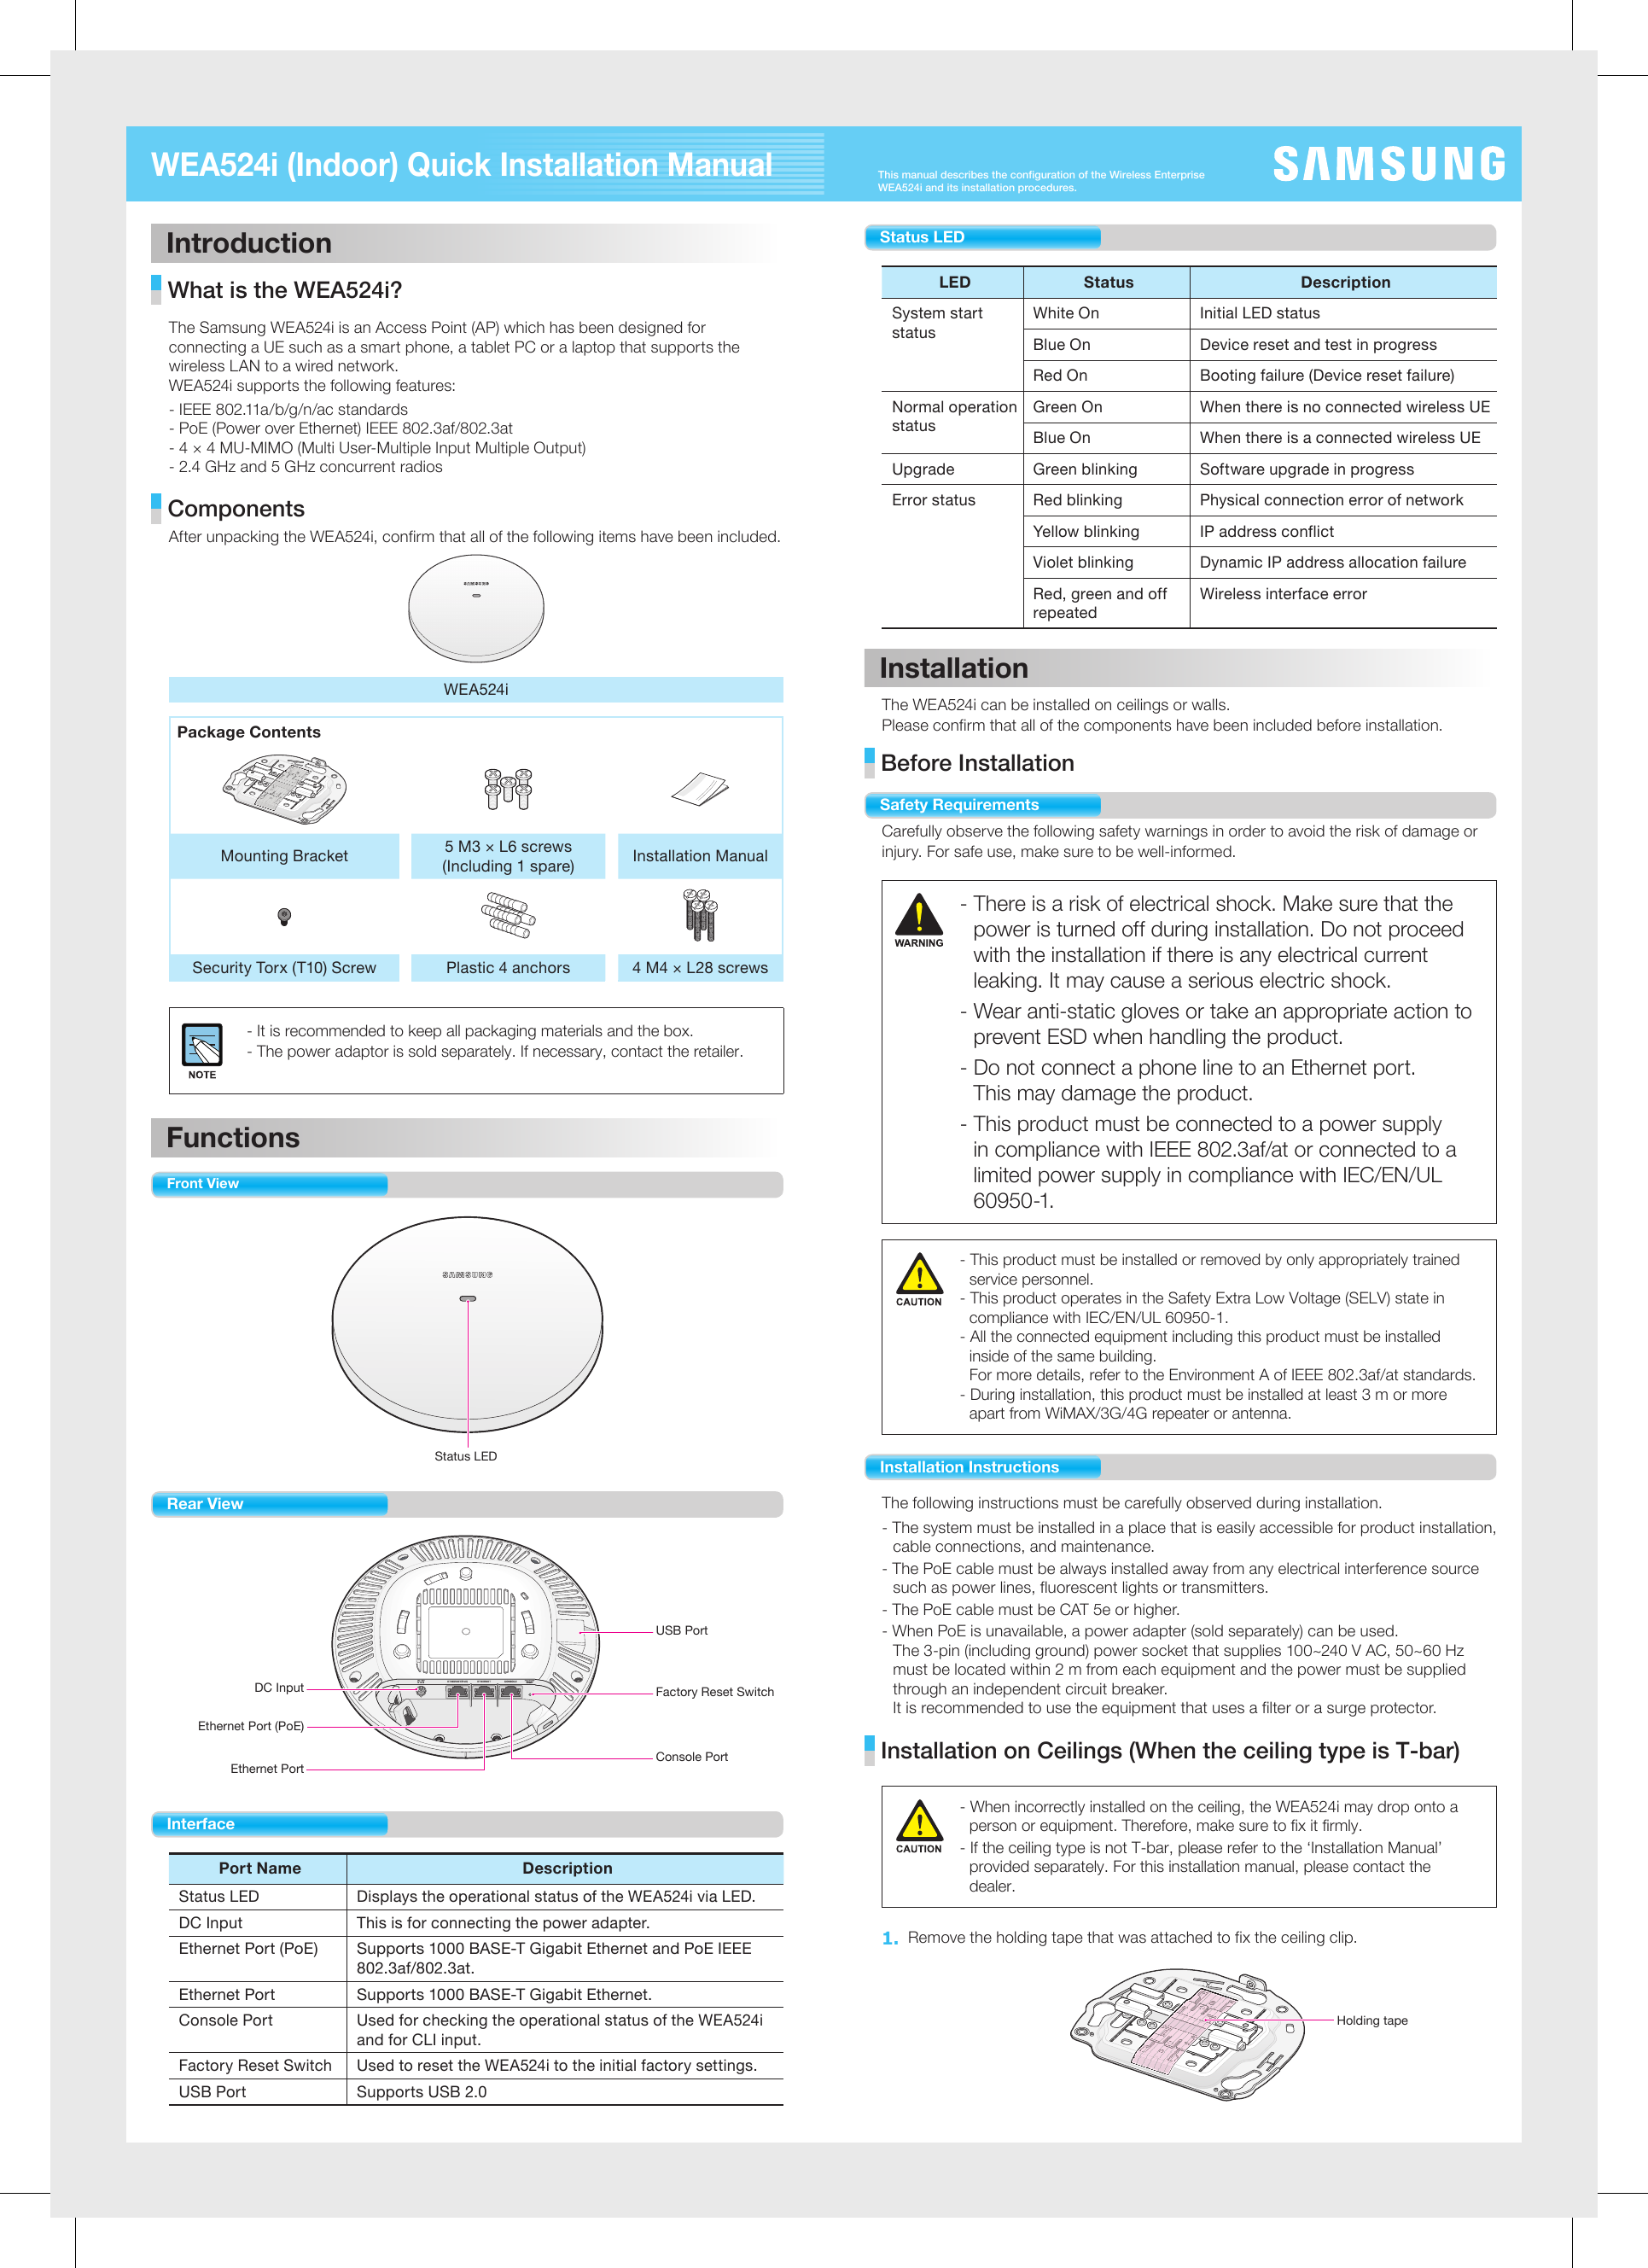 This manual describes the configuration of the Wireless Enterprise WEA524i and its installation procedures.WEA524i (Indoor) Quick Installation ManualIntroduction What is the WEA524i? The Samsung WEA524i is an Access Point (AP) which has been designed for connecting a UE such as a smart phone, a tablet PC or a laptop that supports the wireless LAN to a wired network. WEA524i supports the following features:- IEEE 802.11a/b/g/n/ac standards- PoE (Power over Ethernet) IEEE 802.3af/802.3at- 4 × 4 MU-MIMO (Multi User-Multiple Input Multiple Output)- 2.4 GHz and 5 GHz concurrent radios Components After unpacking the WEA524i, confirm that all of the following items have been included.WEA524iPackage ContentsMounting Bracket 5 M3 × L6 screws(Including 1 spare) Installation ManualSecurity Torx (T10) Screw Plastic 4 anchors 4 M4 × L28 screws- It is recommended to keep all packaging materials and the box.- The power adaptor is sold separately. If necessary, contact the retailer.Functions Front ViewStatus LED Rear View DC InputEthernet Port (PoE)Ethernet PortFactory Reset SwitchUSB PortConsole Port InterfacePort Name DescriptionStatus LED Displays the operational status of the WEA524i via LED.DC Input This is for connecting the power adapter.Ethernet Port (PoE)  Supports 1000 BASE-T Gigabit Ethernet and PoE IEEE 802.3af/802.3at.Ethernet Port  Supports 1000 BASE-T Gigabit Ethernet.Console Port  Used for checking the operational status of the WEA524i and for CLI input.Factory Reset Switch Used to reset the WEA524i to the initial factory settings.USB Port Supports USB 2.0Status LEDLED Status  Description System start statusWhite On  Initial LED statusBlue On Device reset and test in progressRed On Booting failure (Device reset failure)Normal operation statusGreen On  When there is no connected wireless UEBlue On  When there is a connected wireless UEUpgrade  Green blinking  Software upgrade in progressError status  Red blinking  Physical connection error of networkYellow blinking IP address conflictViolet blinking  Dynamic IP address allocation failureRed, green and off repeatedWireless interface errorInstallationThe WEA524i can be installed on ceilings or walls.Please confirm that all of the components have been included before installation. Before Installation Safety RequirementsCarefully observe the following safety warnings in order to avoid the risk of damage or injury. For safe use, make sure to be well-informed. - There is a risk of electrical shock. Make sure that the power is turned off during installation. Do not proceed with the installation if there is any electrical current leaking. It may cause a serious electric shock.- Wear anti-static gloves or take an appropriate action to prevent ESD when handling the product.- Do not connect a phone line to an Ethernet port.  This may damage the product.- This product must be connected to a power supply in compliance with IEEE 802.3af/at or connected to a limited power supply in compliance with IEC/EN/UL 60950-1.- This product must be installed or removed by only appropriately trained service personnel.- This product operates in the Safety Extra Low Voltage (SELV) state in compliance with IEC/EN/UL 60950-1.- All the connected equipment including this product must be installed inside of the same building.  For more details, refer to the Environment A of IEEE 802.3af/at standards.- During installation, this product must be installed at least 3 m or more apart from WiMAX/3G/4G repeater or antenna.Installation InstructionsThe following instructions must be carefully observed during installation. - The system must be installed in a place that is easily accessible for product installation, cable connections, and maintenance.- The PoE cable must be always installed away from any electrical interference source such as power lines, fluorescent lights or transmitters.- The PoE cable must be CAT 5e or higher.- When PoE is unavailable, a power adapter (sold separately) can be used.  The 3-pin (including ground) power socket that supplies 100~240 V AC, 50~60 Hz must be located within 2 m from each equipment and the power must be supplied through an independent circuit breaker.  It is recommended to use the equipment that uses a filter or a surge protector. Installation on Ceilings (When the ceiling type is T-bar)- When incorrectly installed on the ceiling, the WEA524i may drop onto a person or equipment. Therefore, make sure to fix it firmly.- If the ceiling type is not T-bar, please refer to the ‘Installation Manual’ provided separately. For this installation manual, please contact the dealer. 1. Remove the holding tape that was attached to fix the ceiling clip.                         Holding tape 